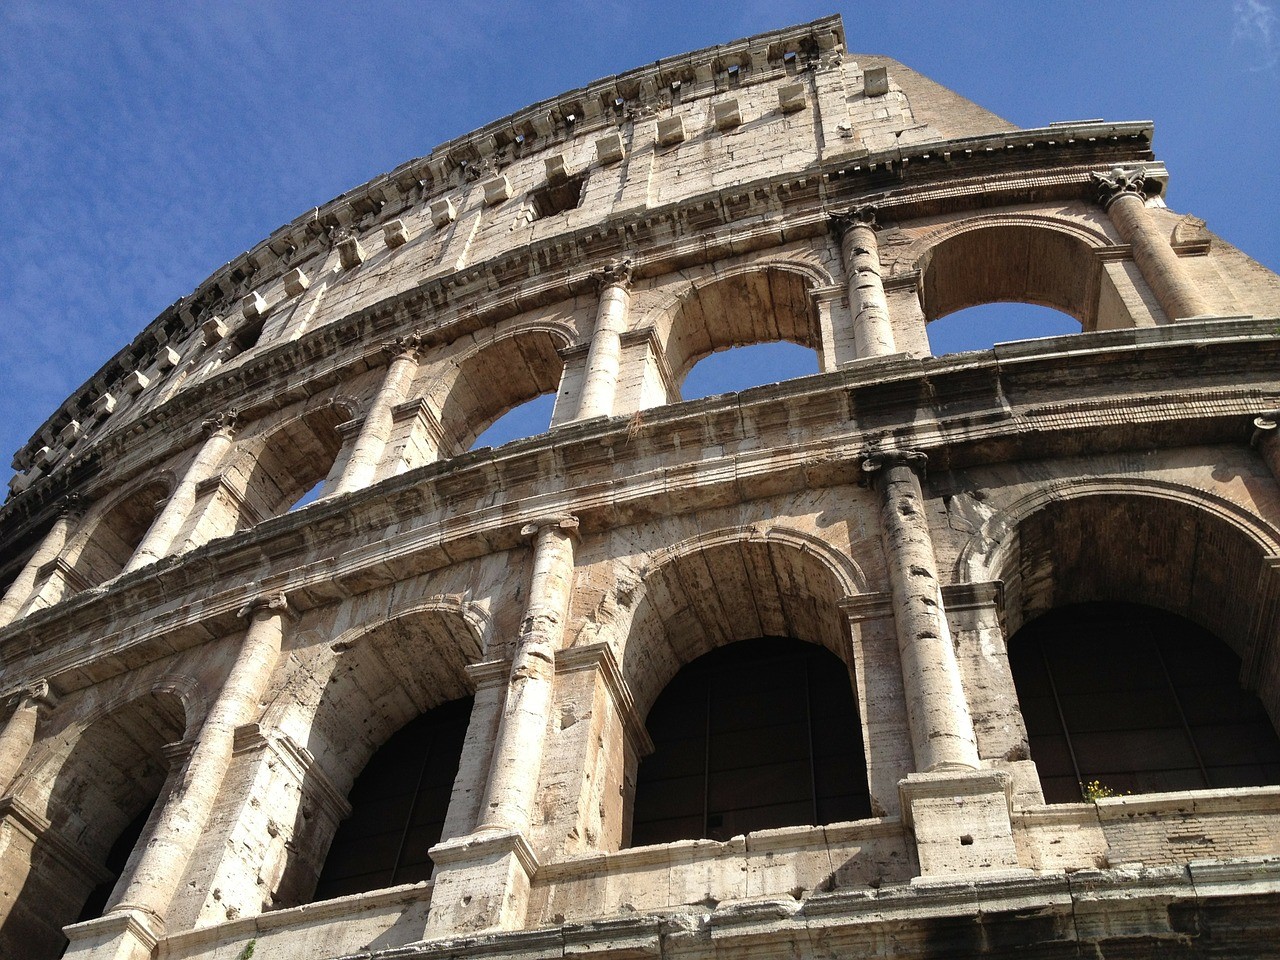 See the Colosseum